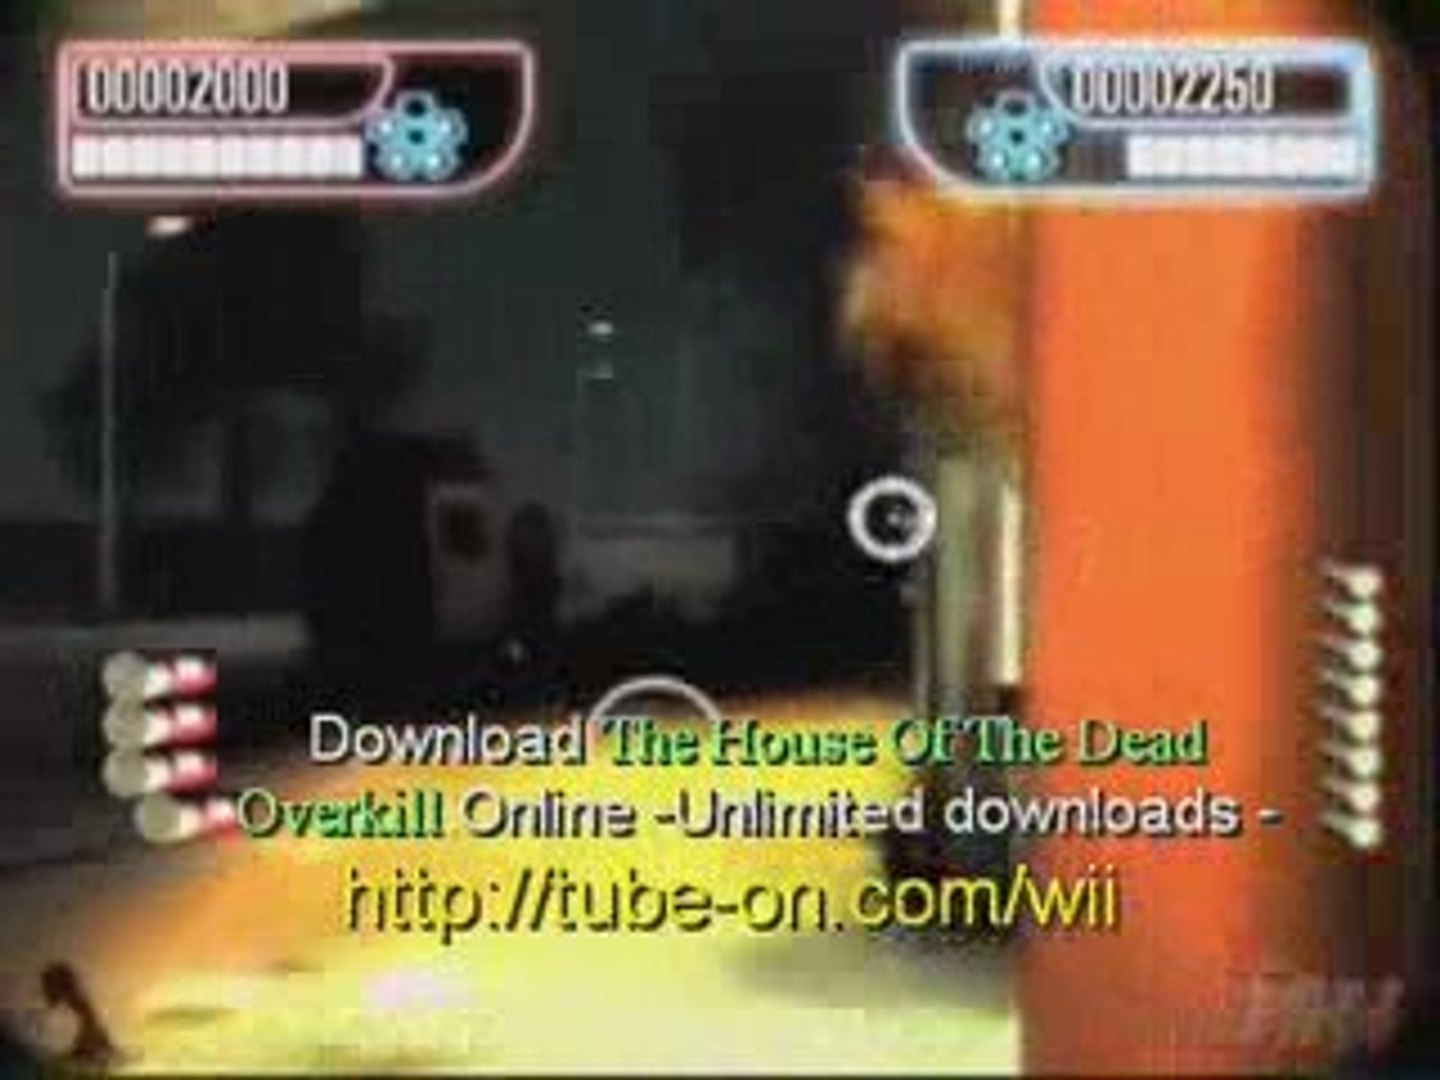 How To Download The House Of The Dead Overkill Wii Unlimite - video  Dailymotion